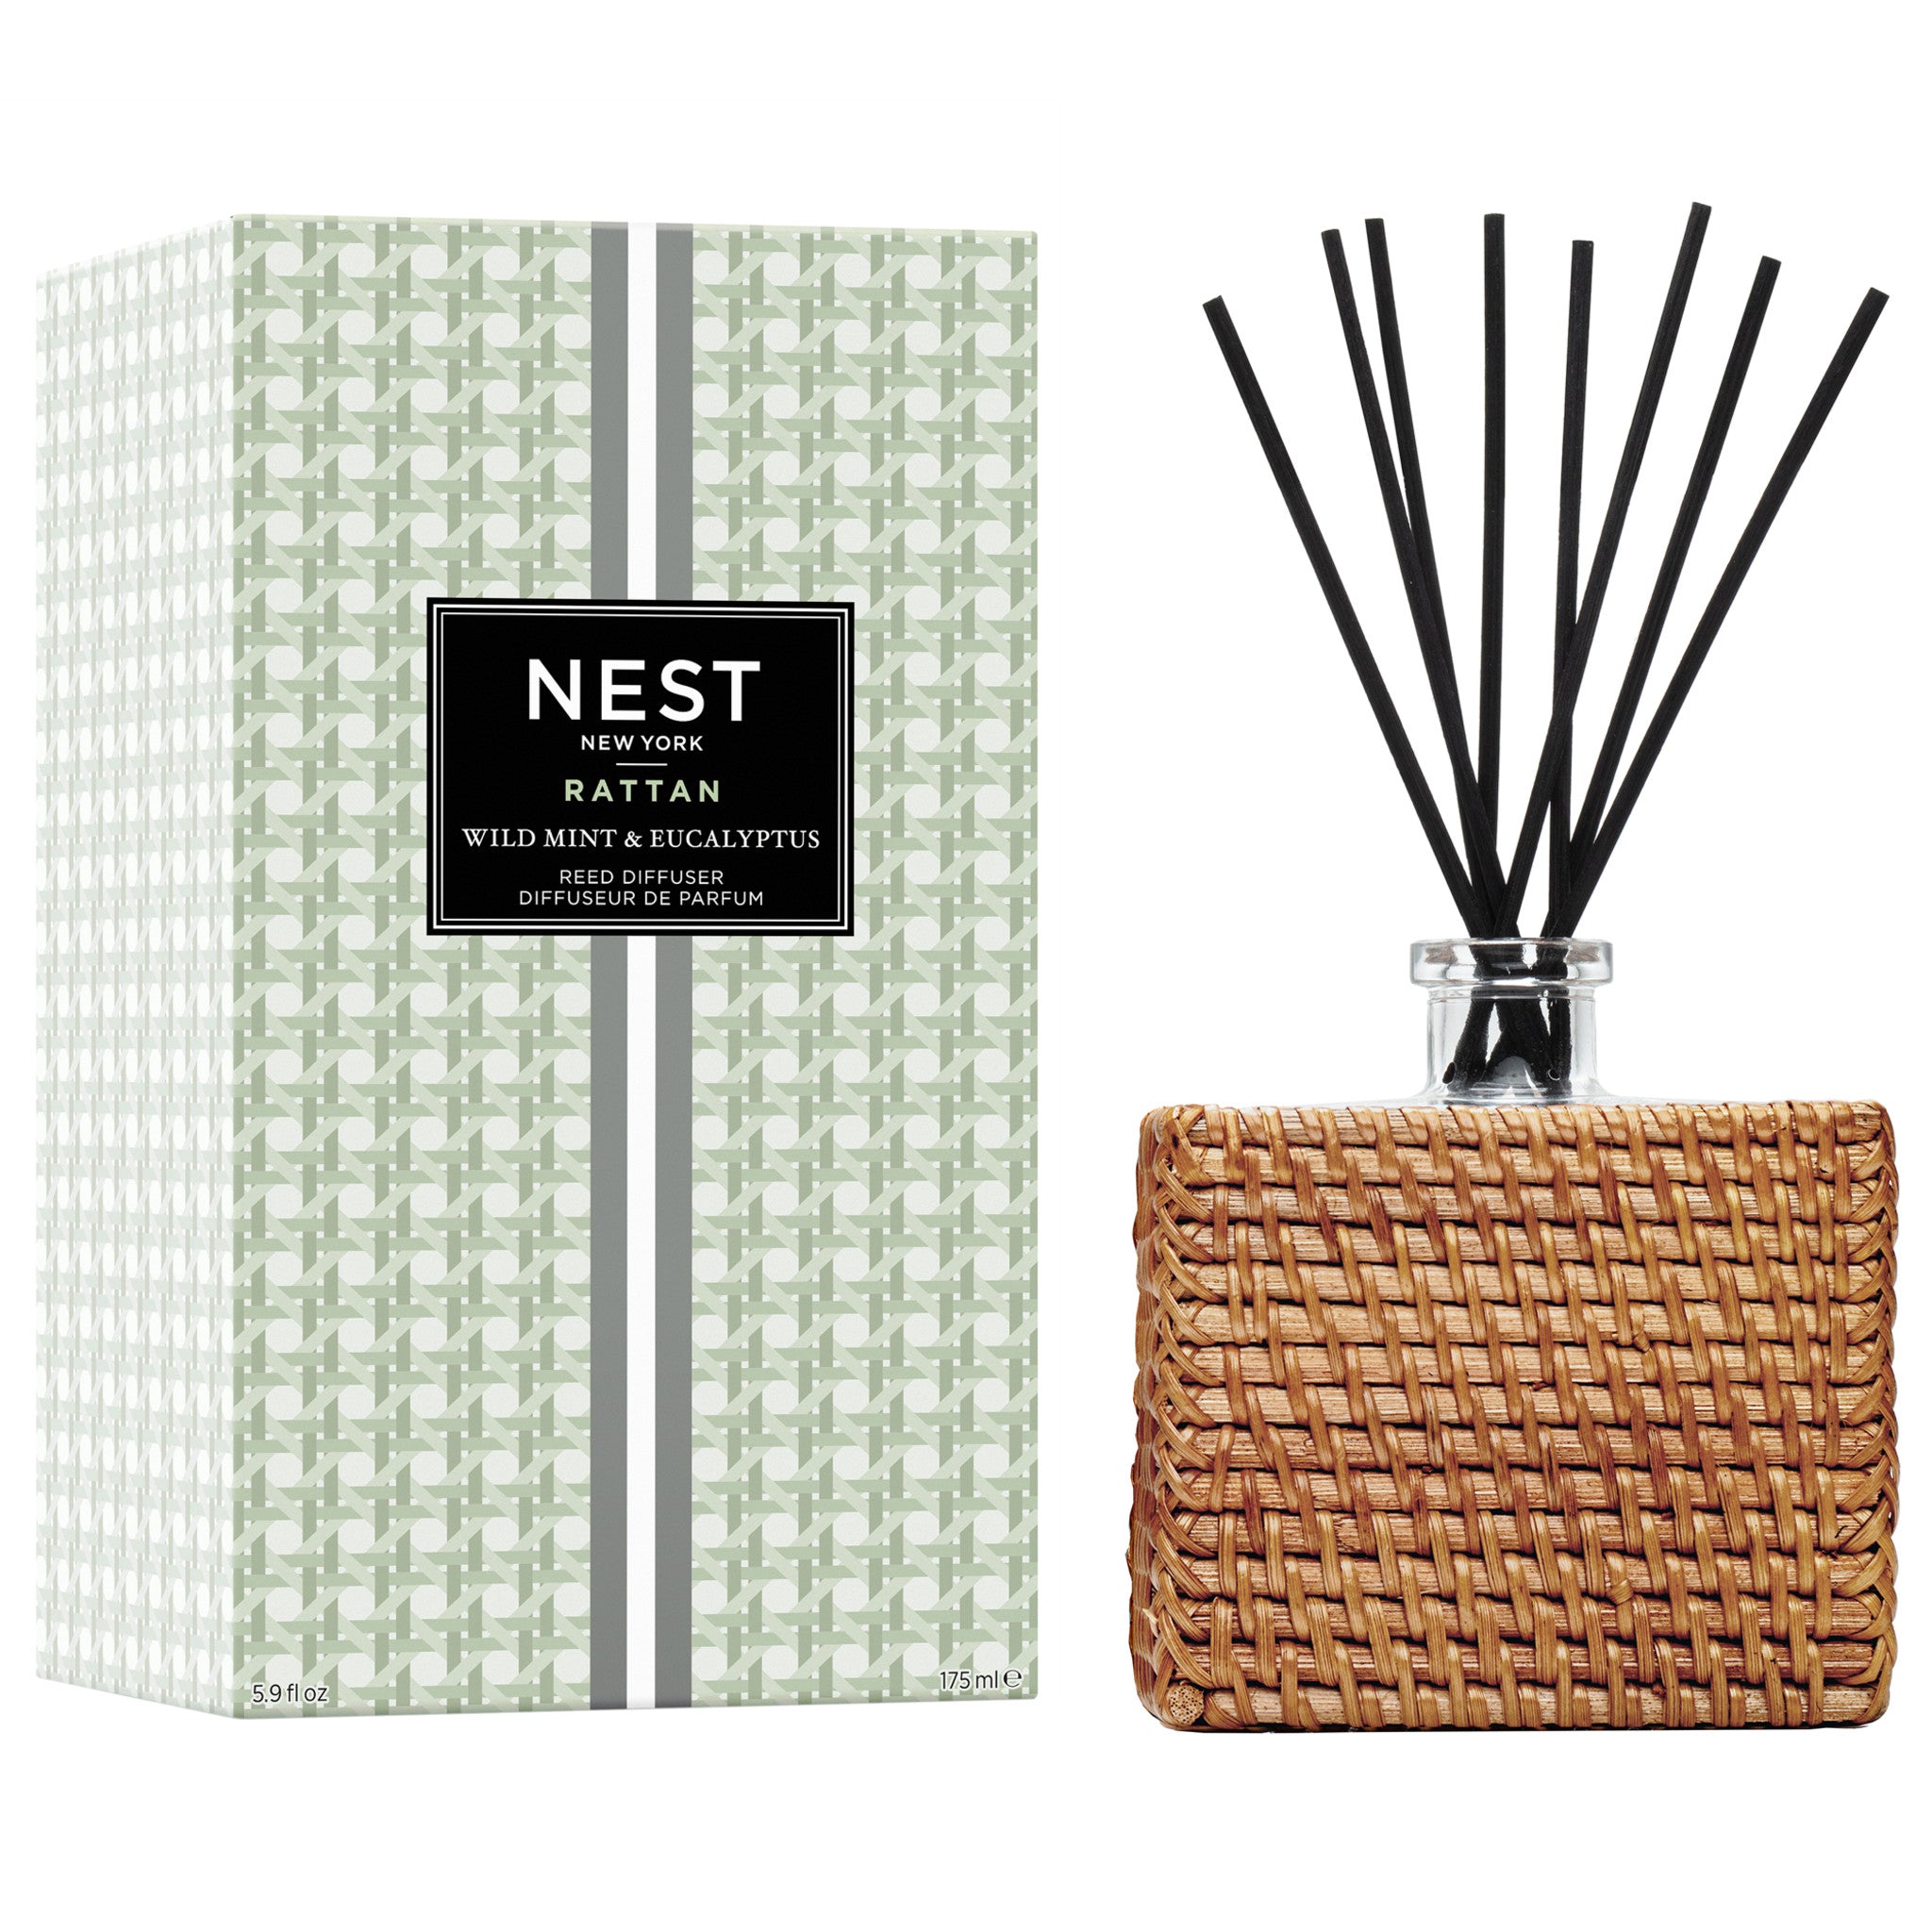 Rattan Wild Mint & Eucalyptus Reed Diffuser (Limited Edition)